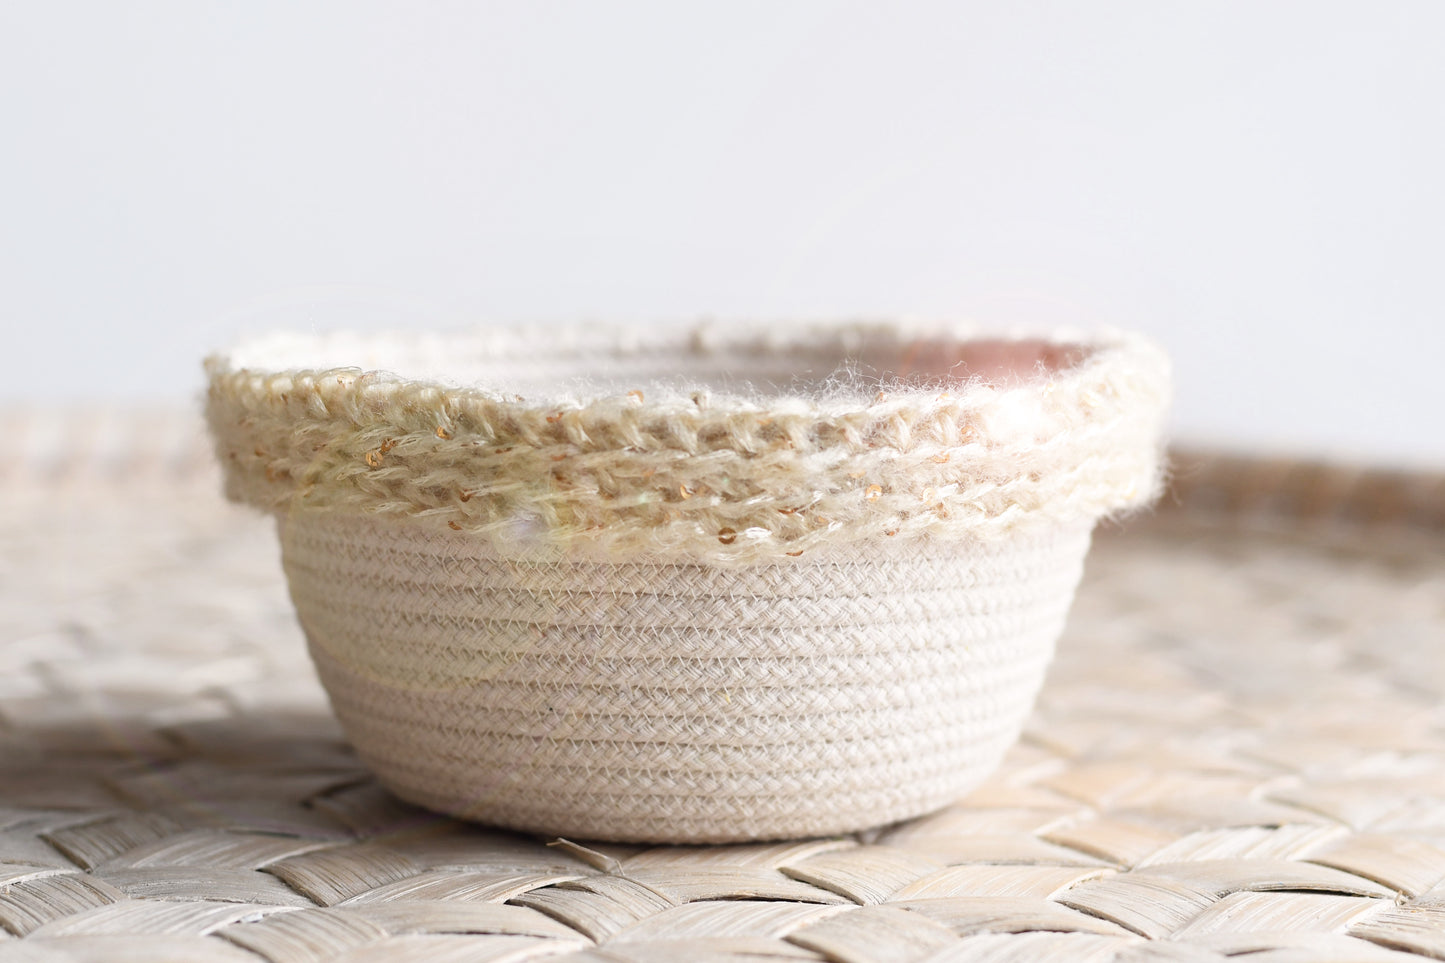 Rope basket with crochet trim